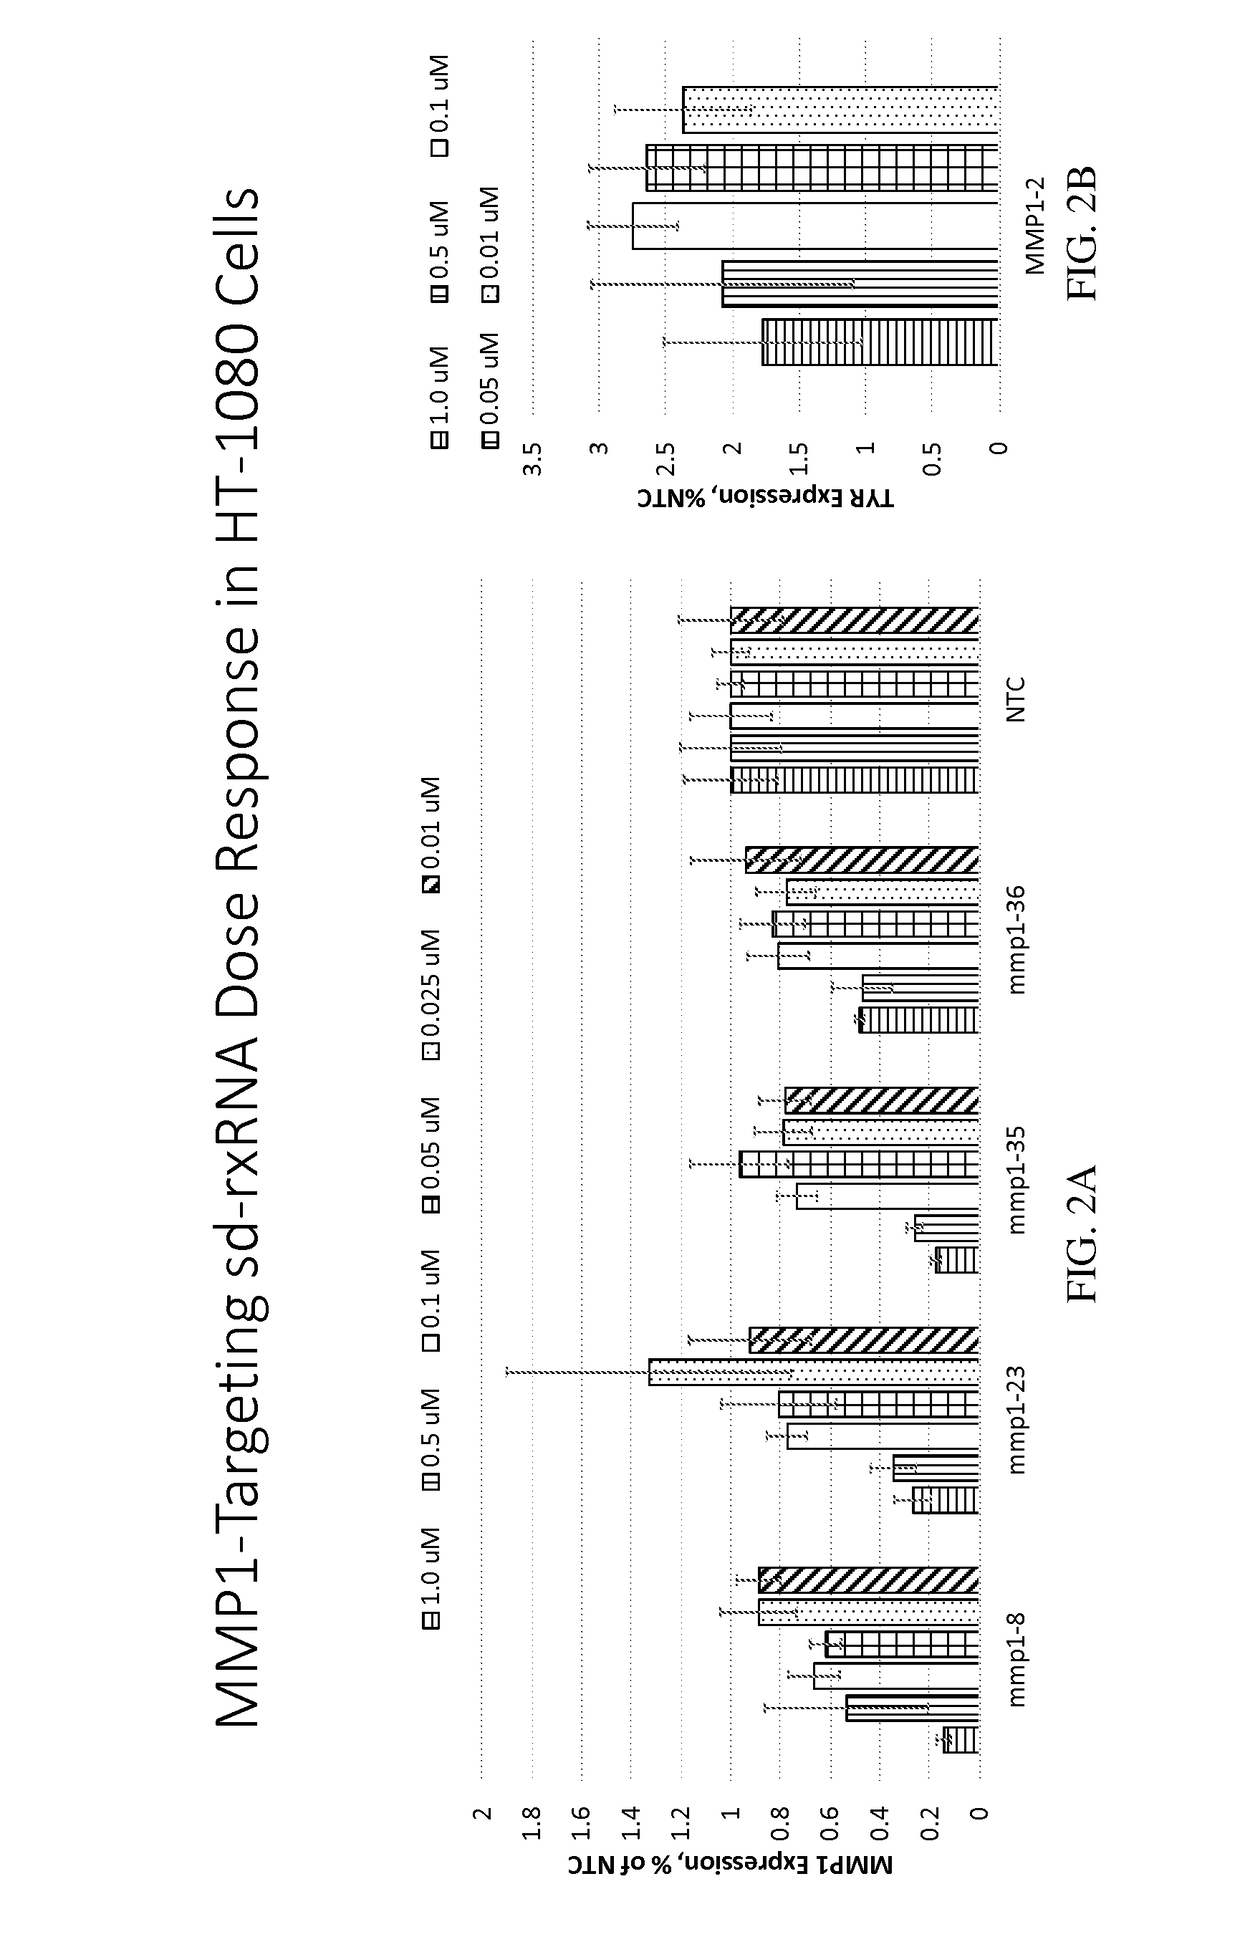 Methods for treating aging and skin disorders using nucleic acids targeting tyr or mmp1